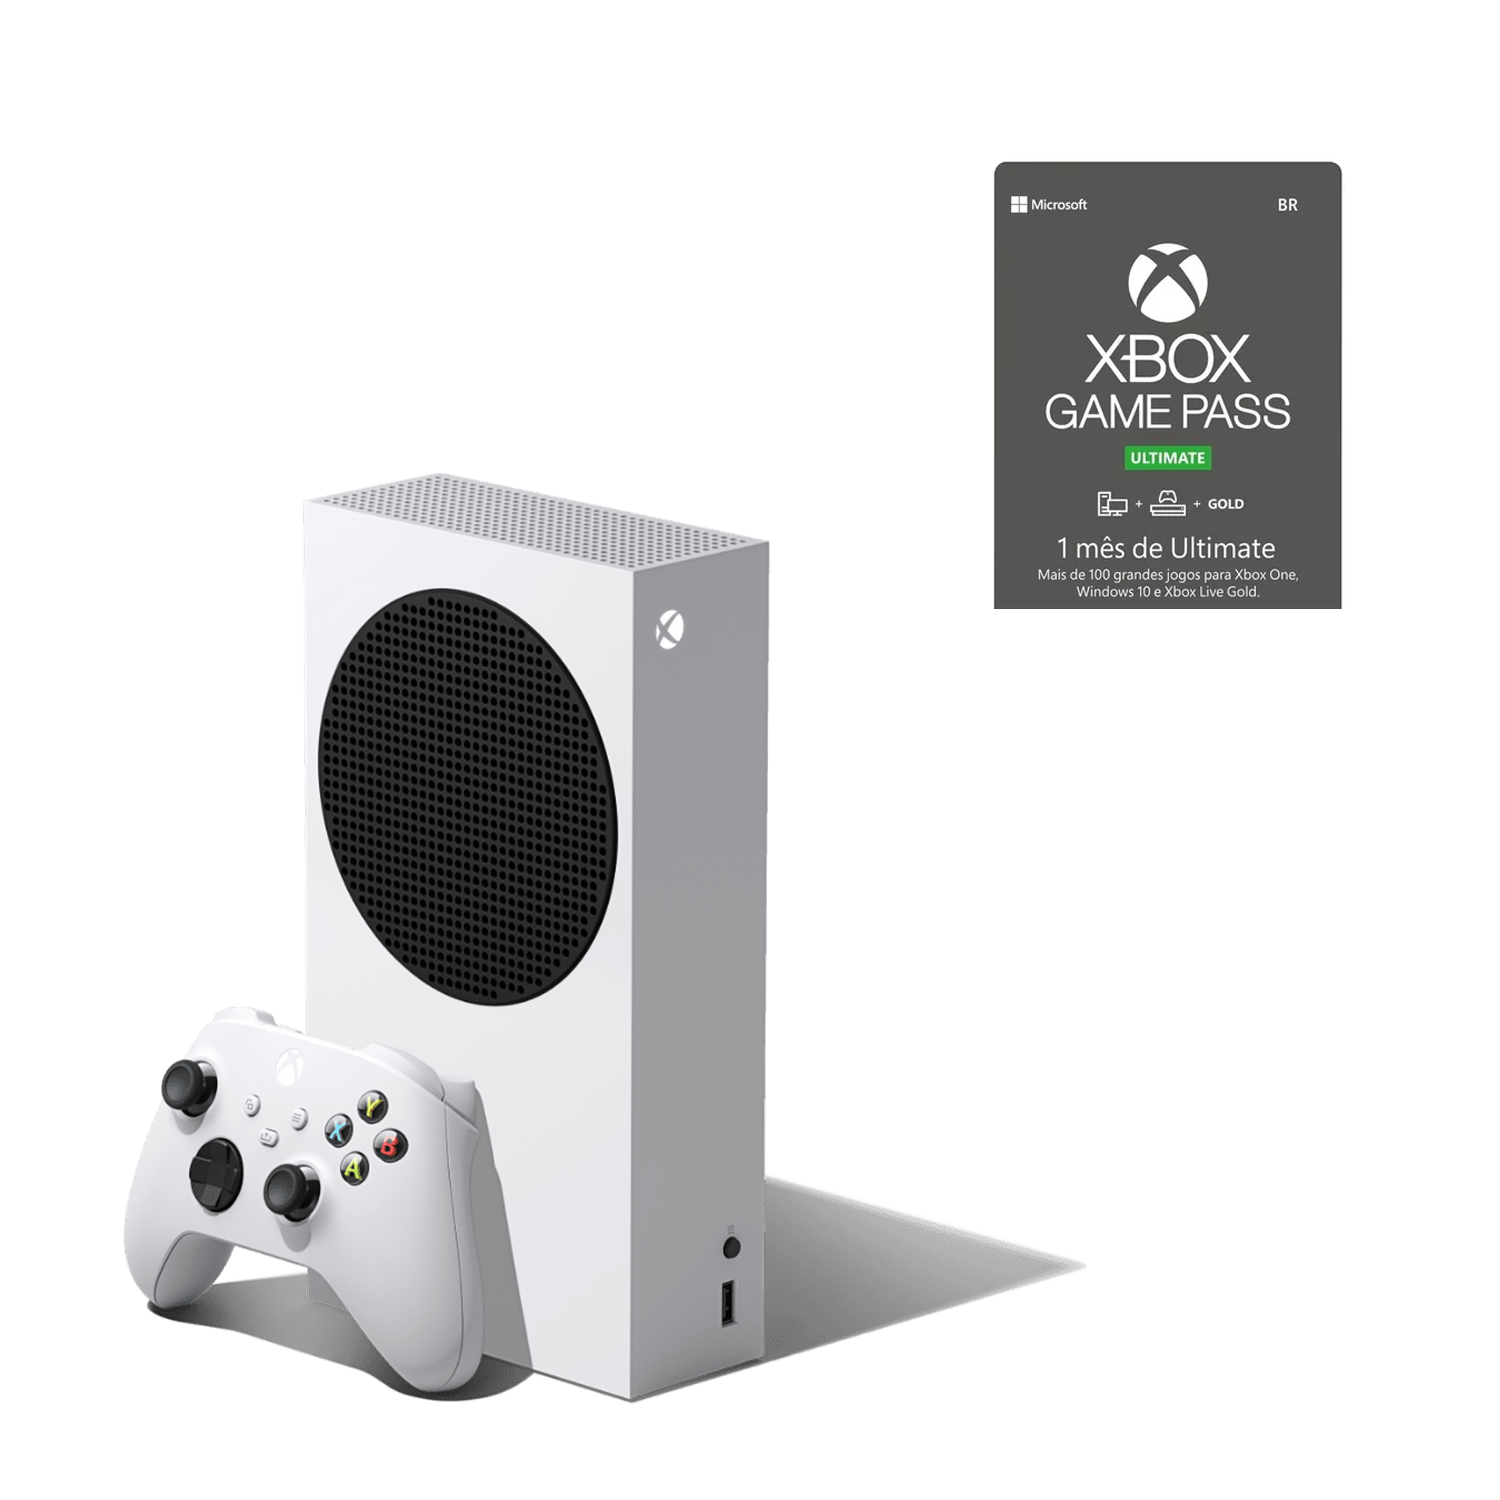 Console Xbox Series S - 512gb SSD + Gamepass Ultimate 1 Mês